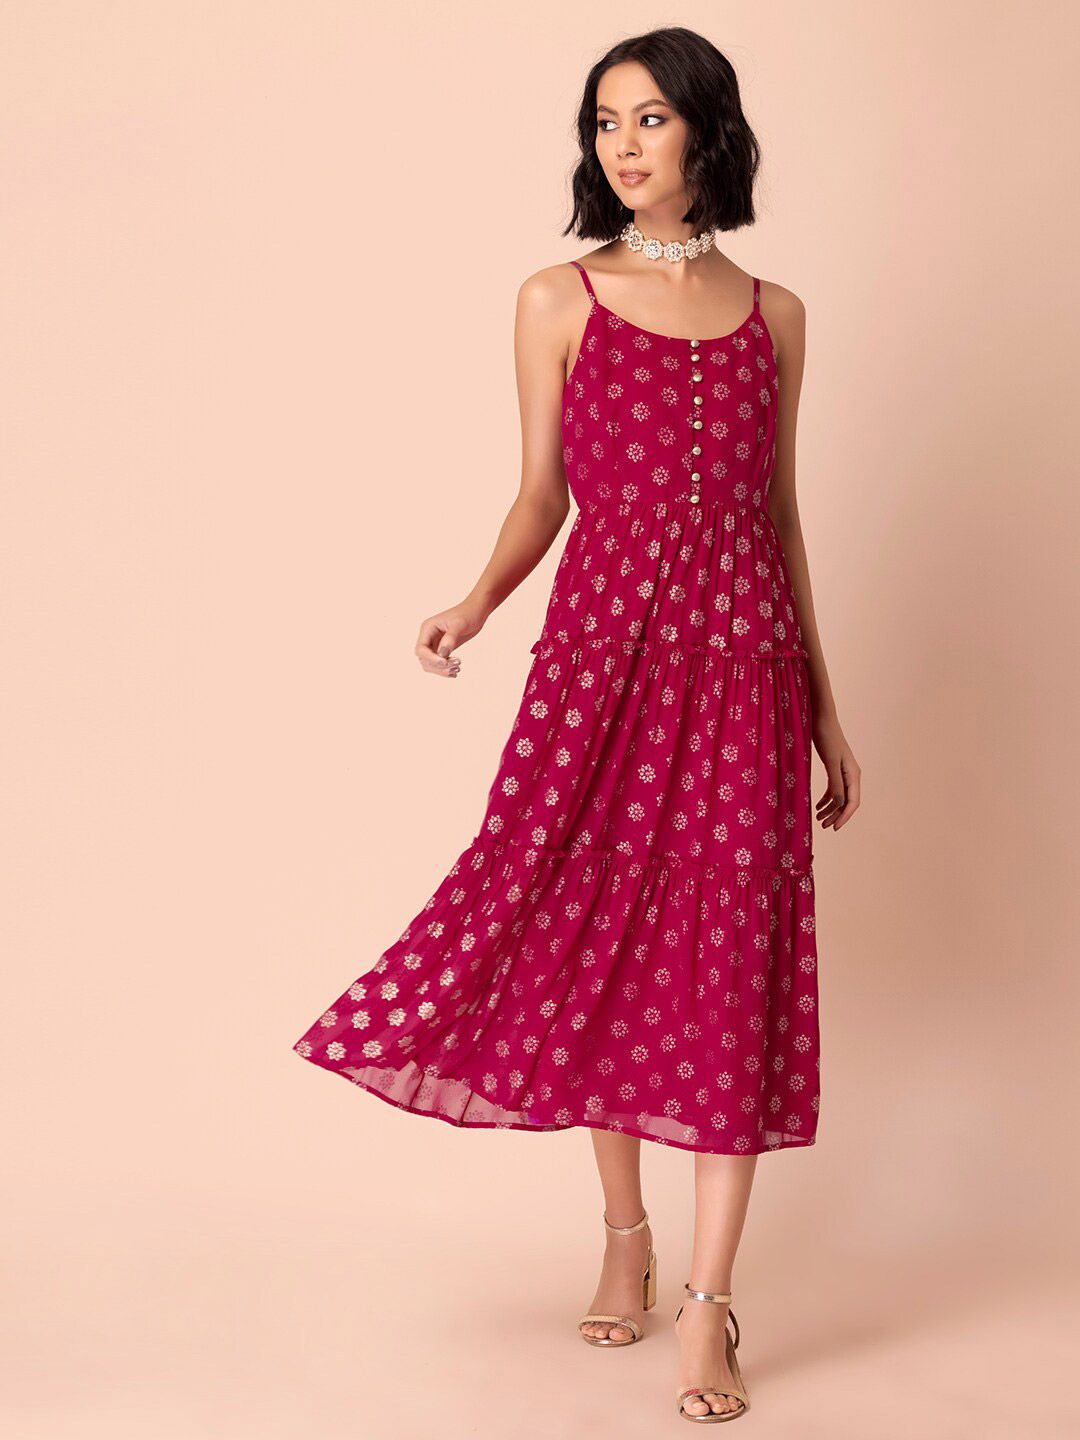 INDYA Pink Ethnic Motifs Georgette Ethnic A-Line Midi Dress Price in India